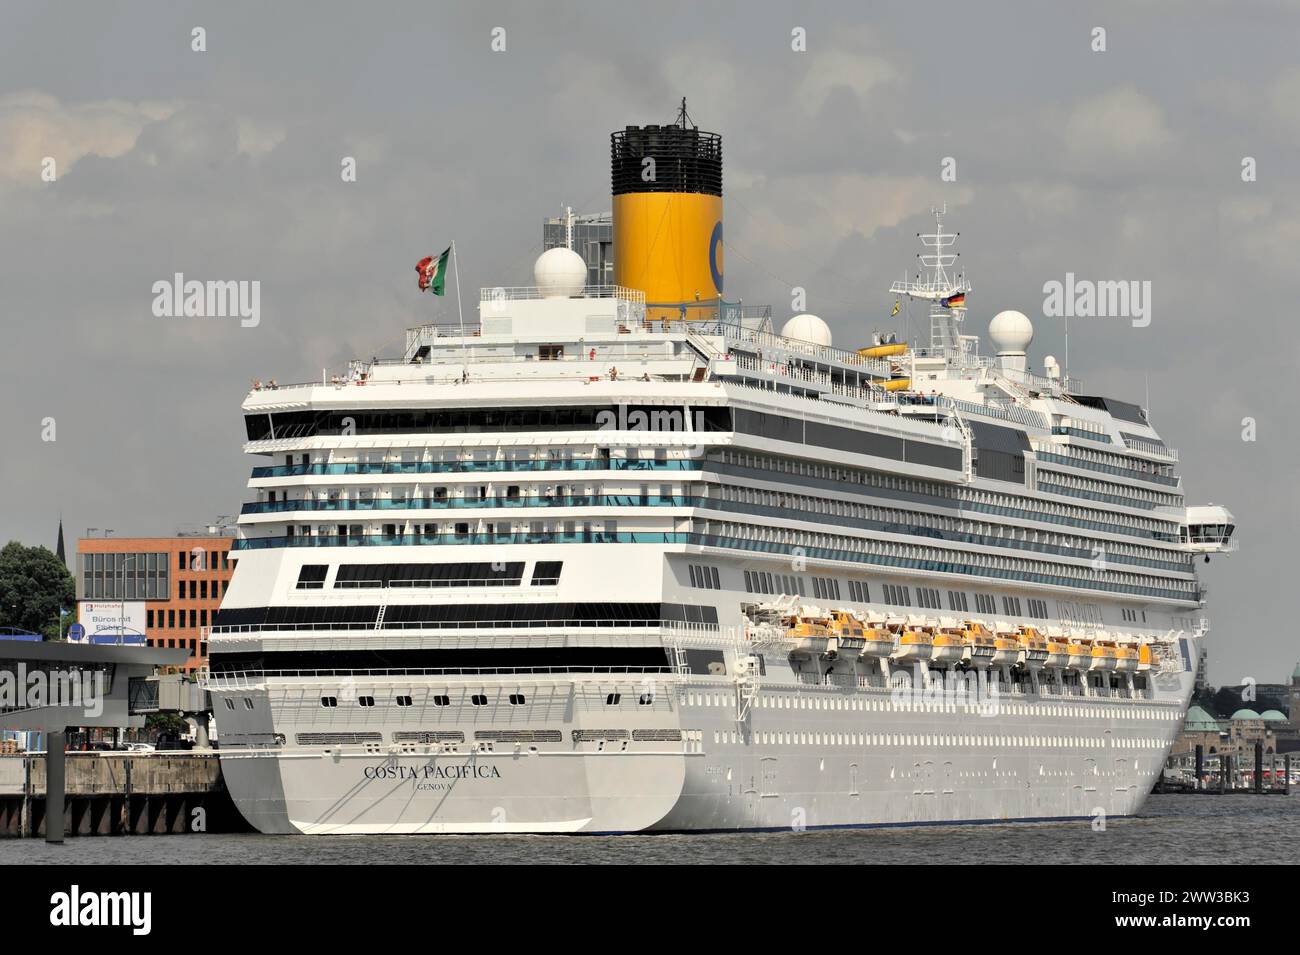 COSTA PACIFICA, cruise ship moored at the harbour under partly cloudy skies, Hamburg, Hanseatic City, Germany Stock Photo